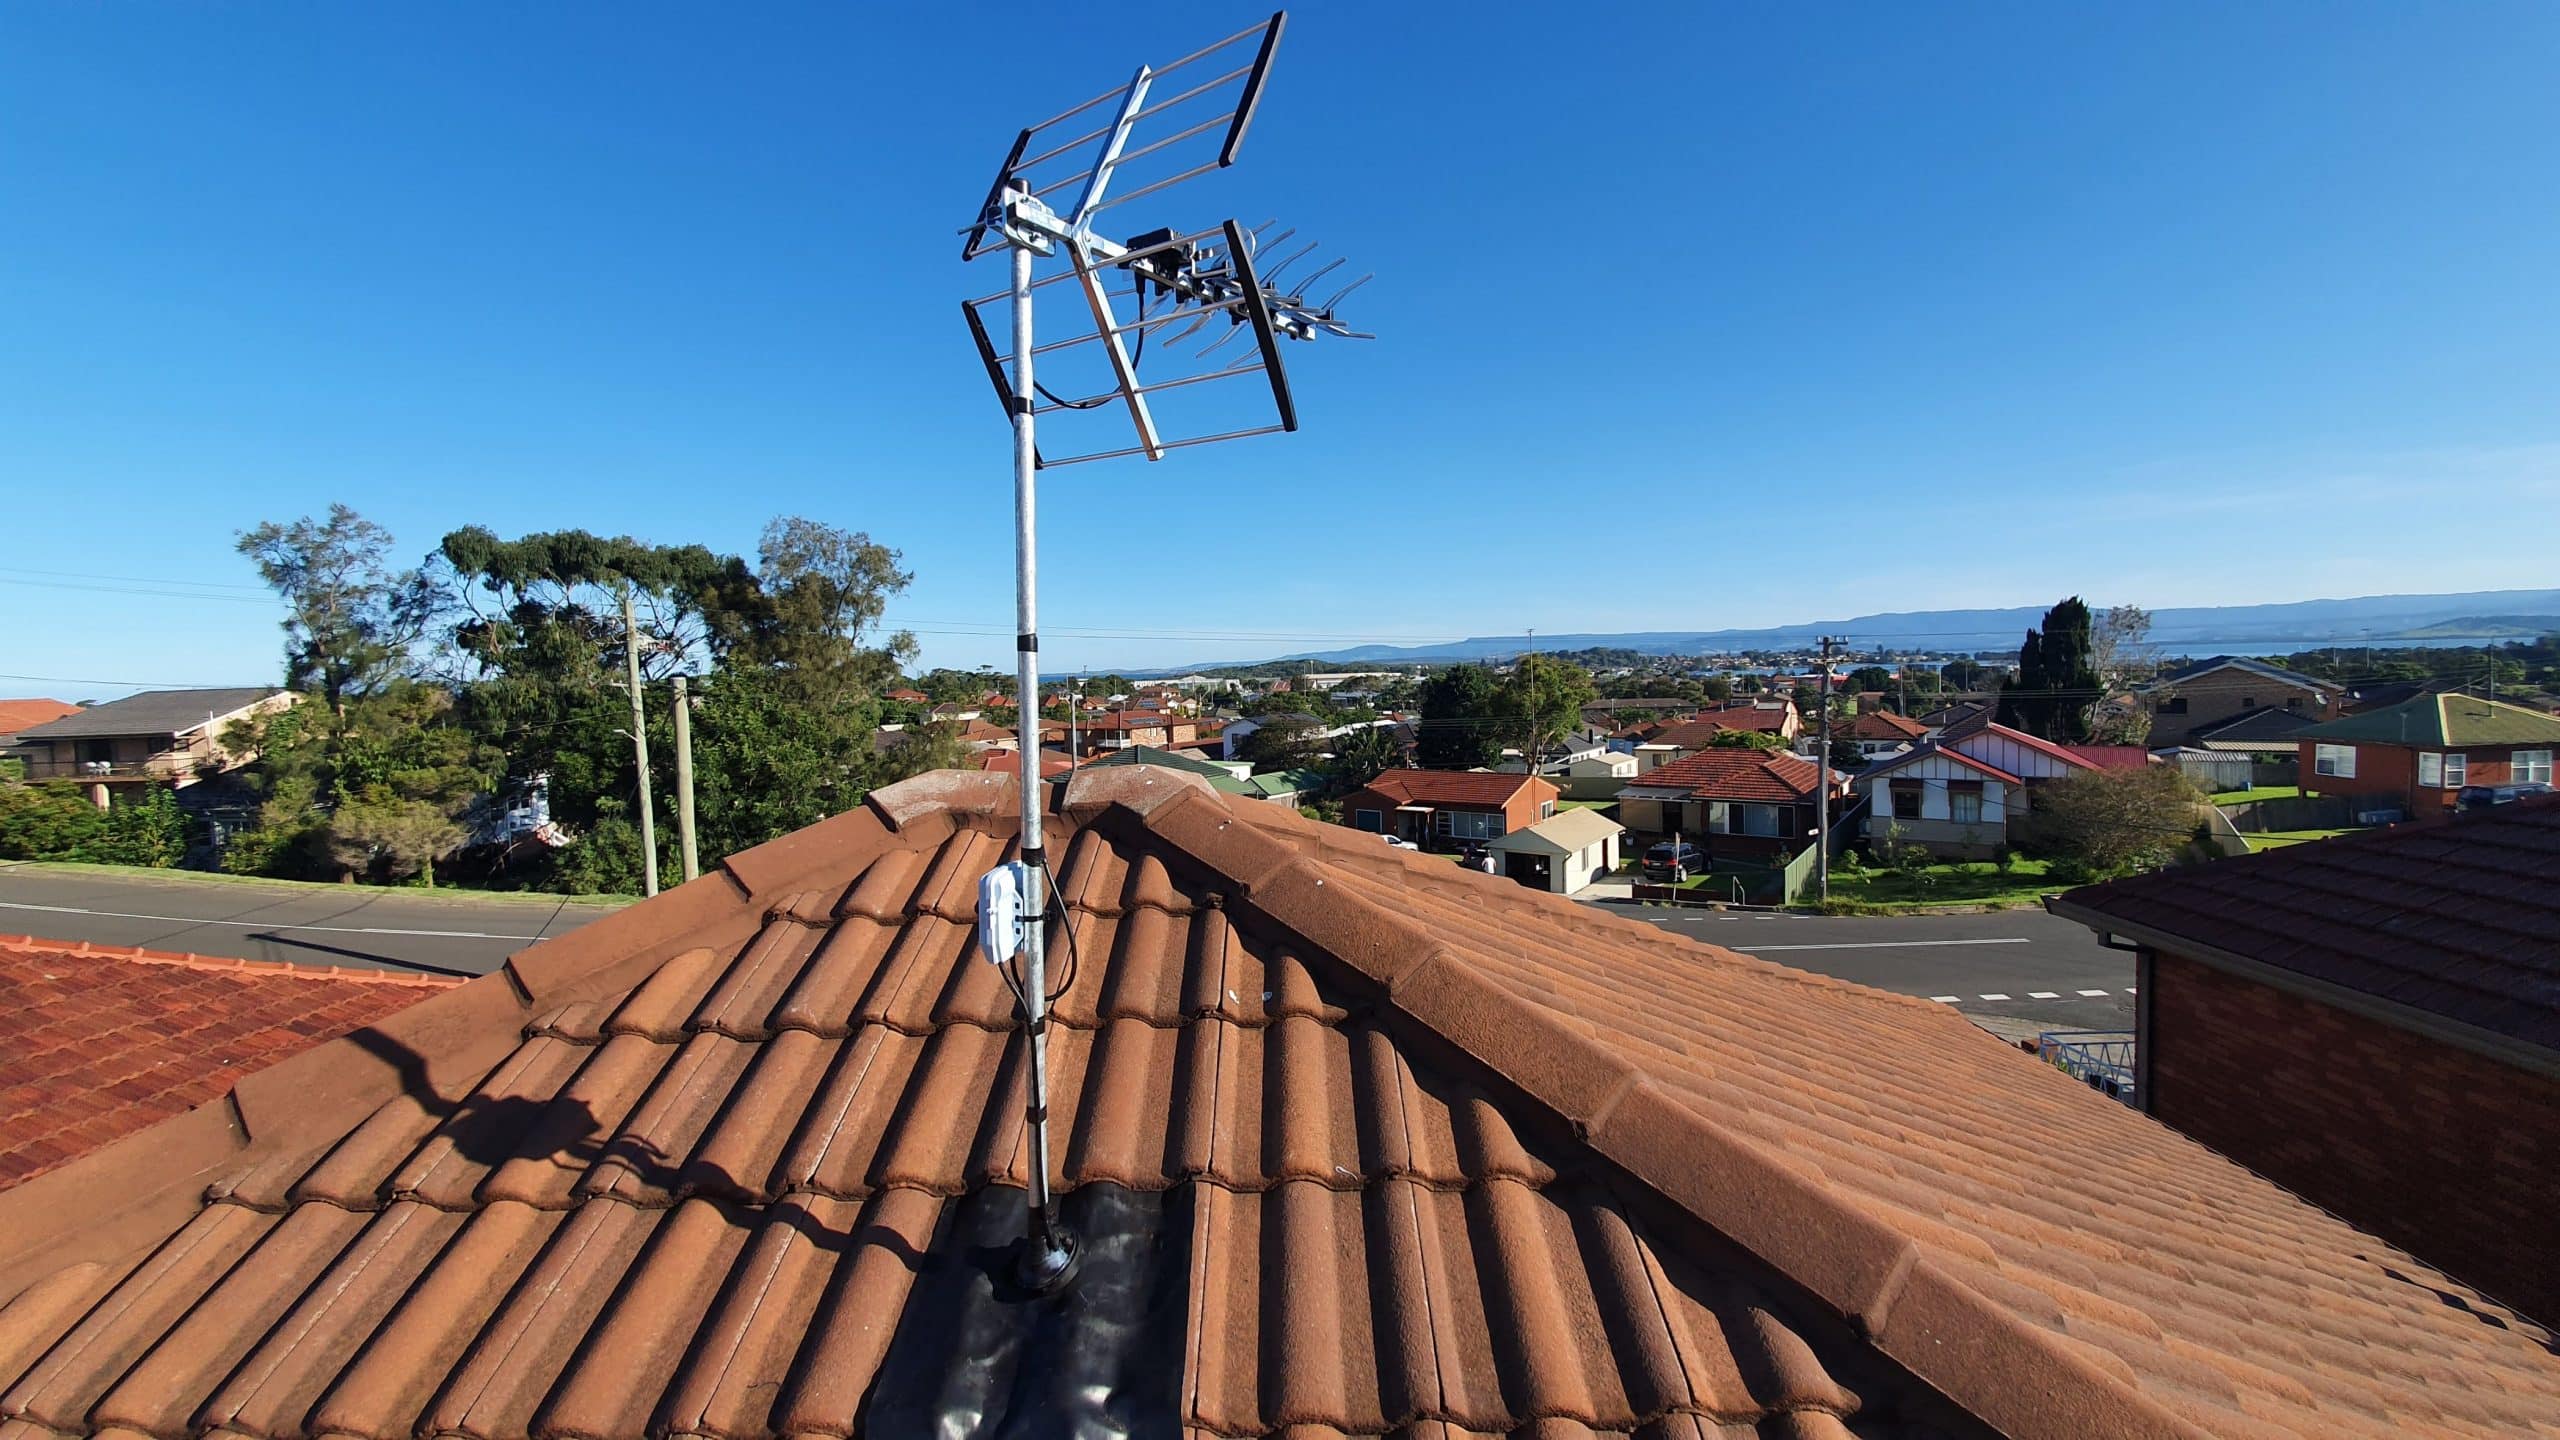 How to Get the Best Cable TV Antenna Reception